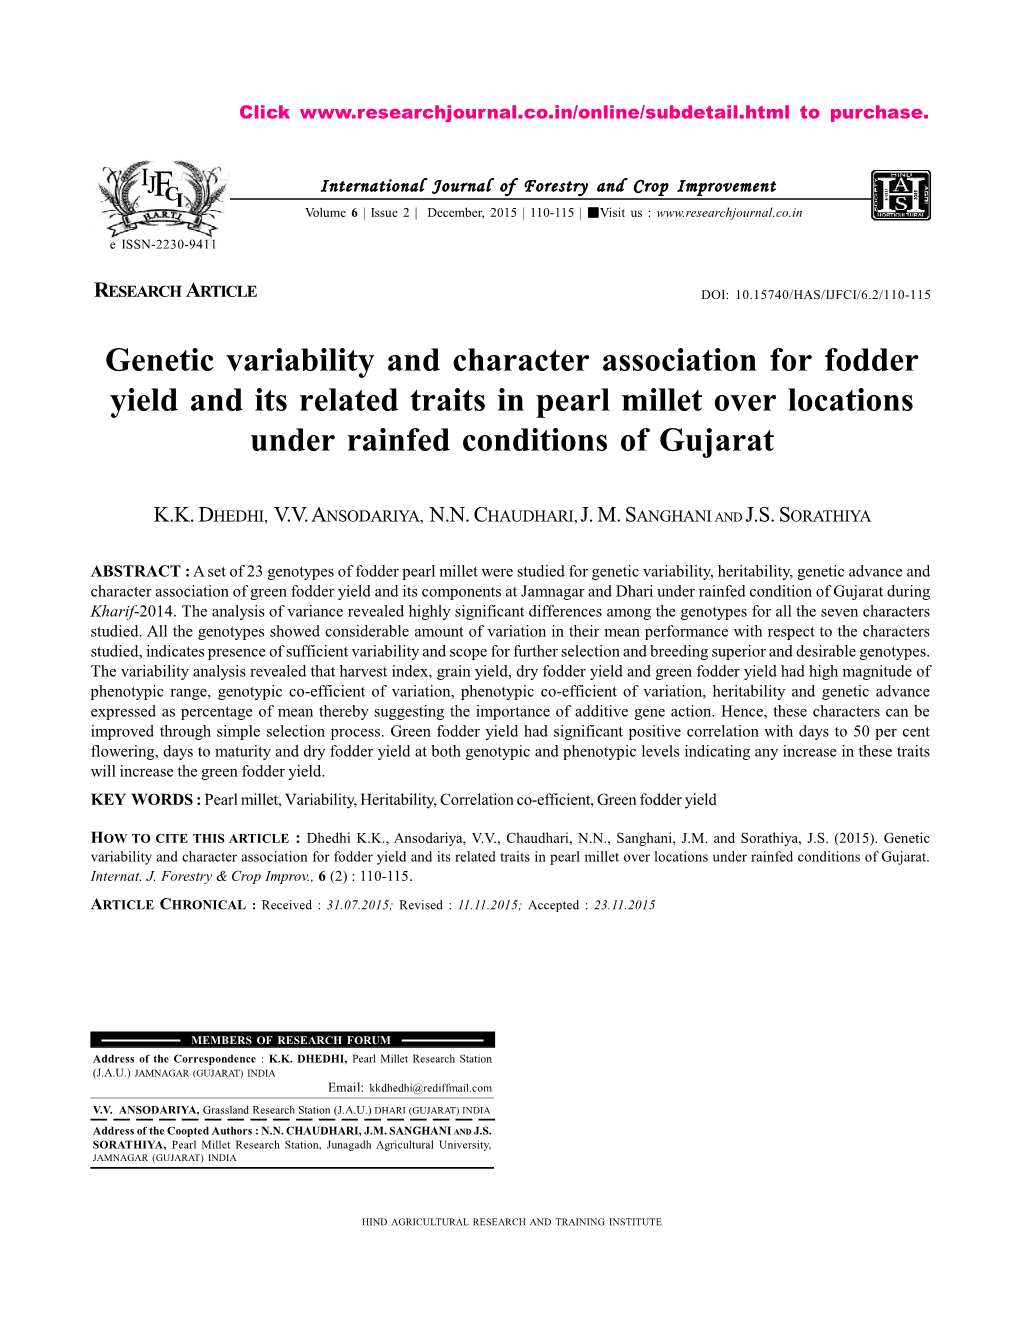 Genetic Variability and Character Association for Fodder Yield and Its Related Traits in Pearl Millet Over Locations Under Rainfed Conditions of Gujarat